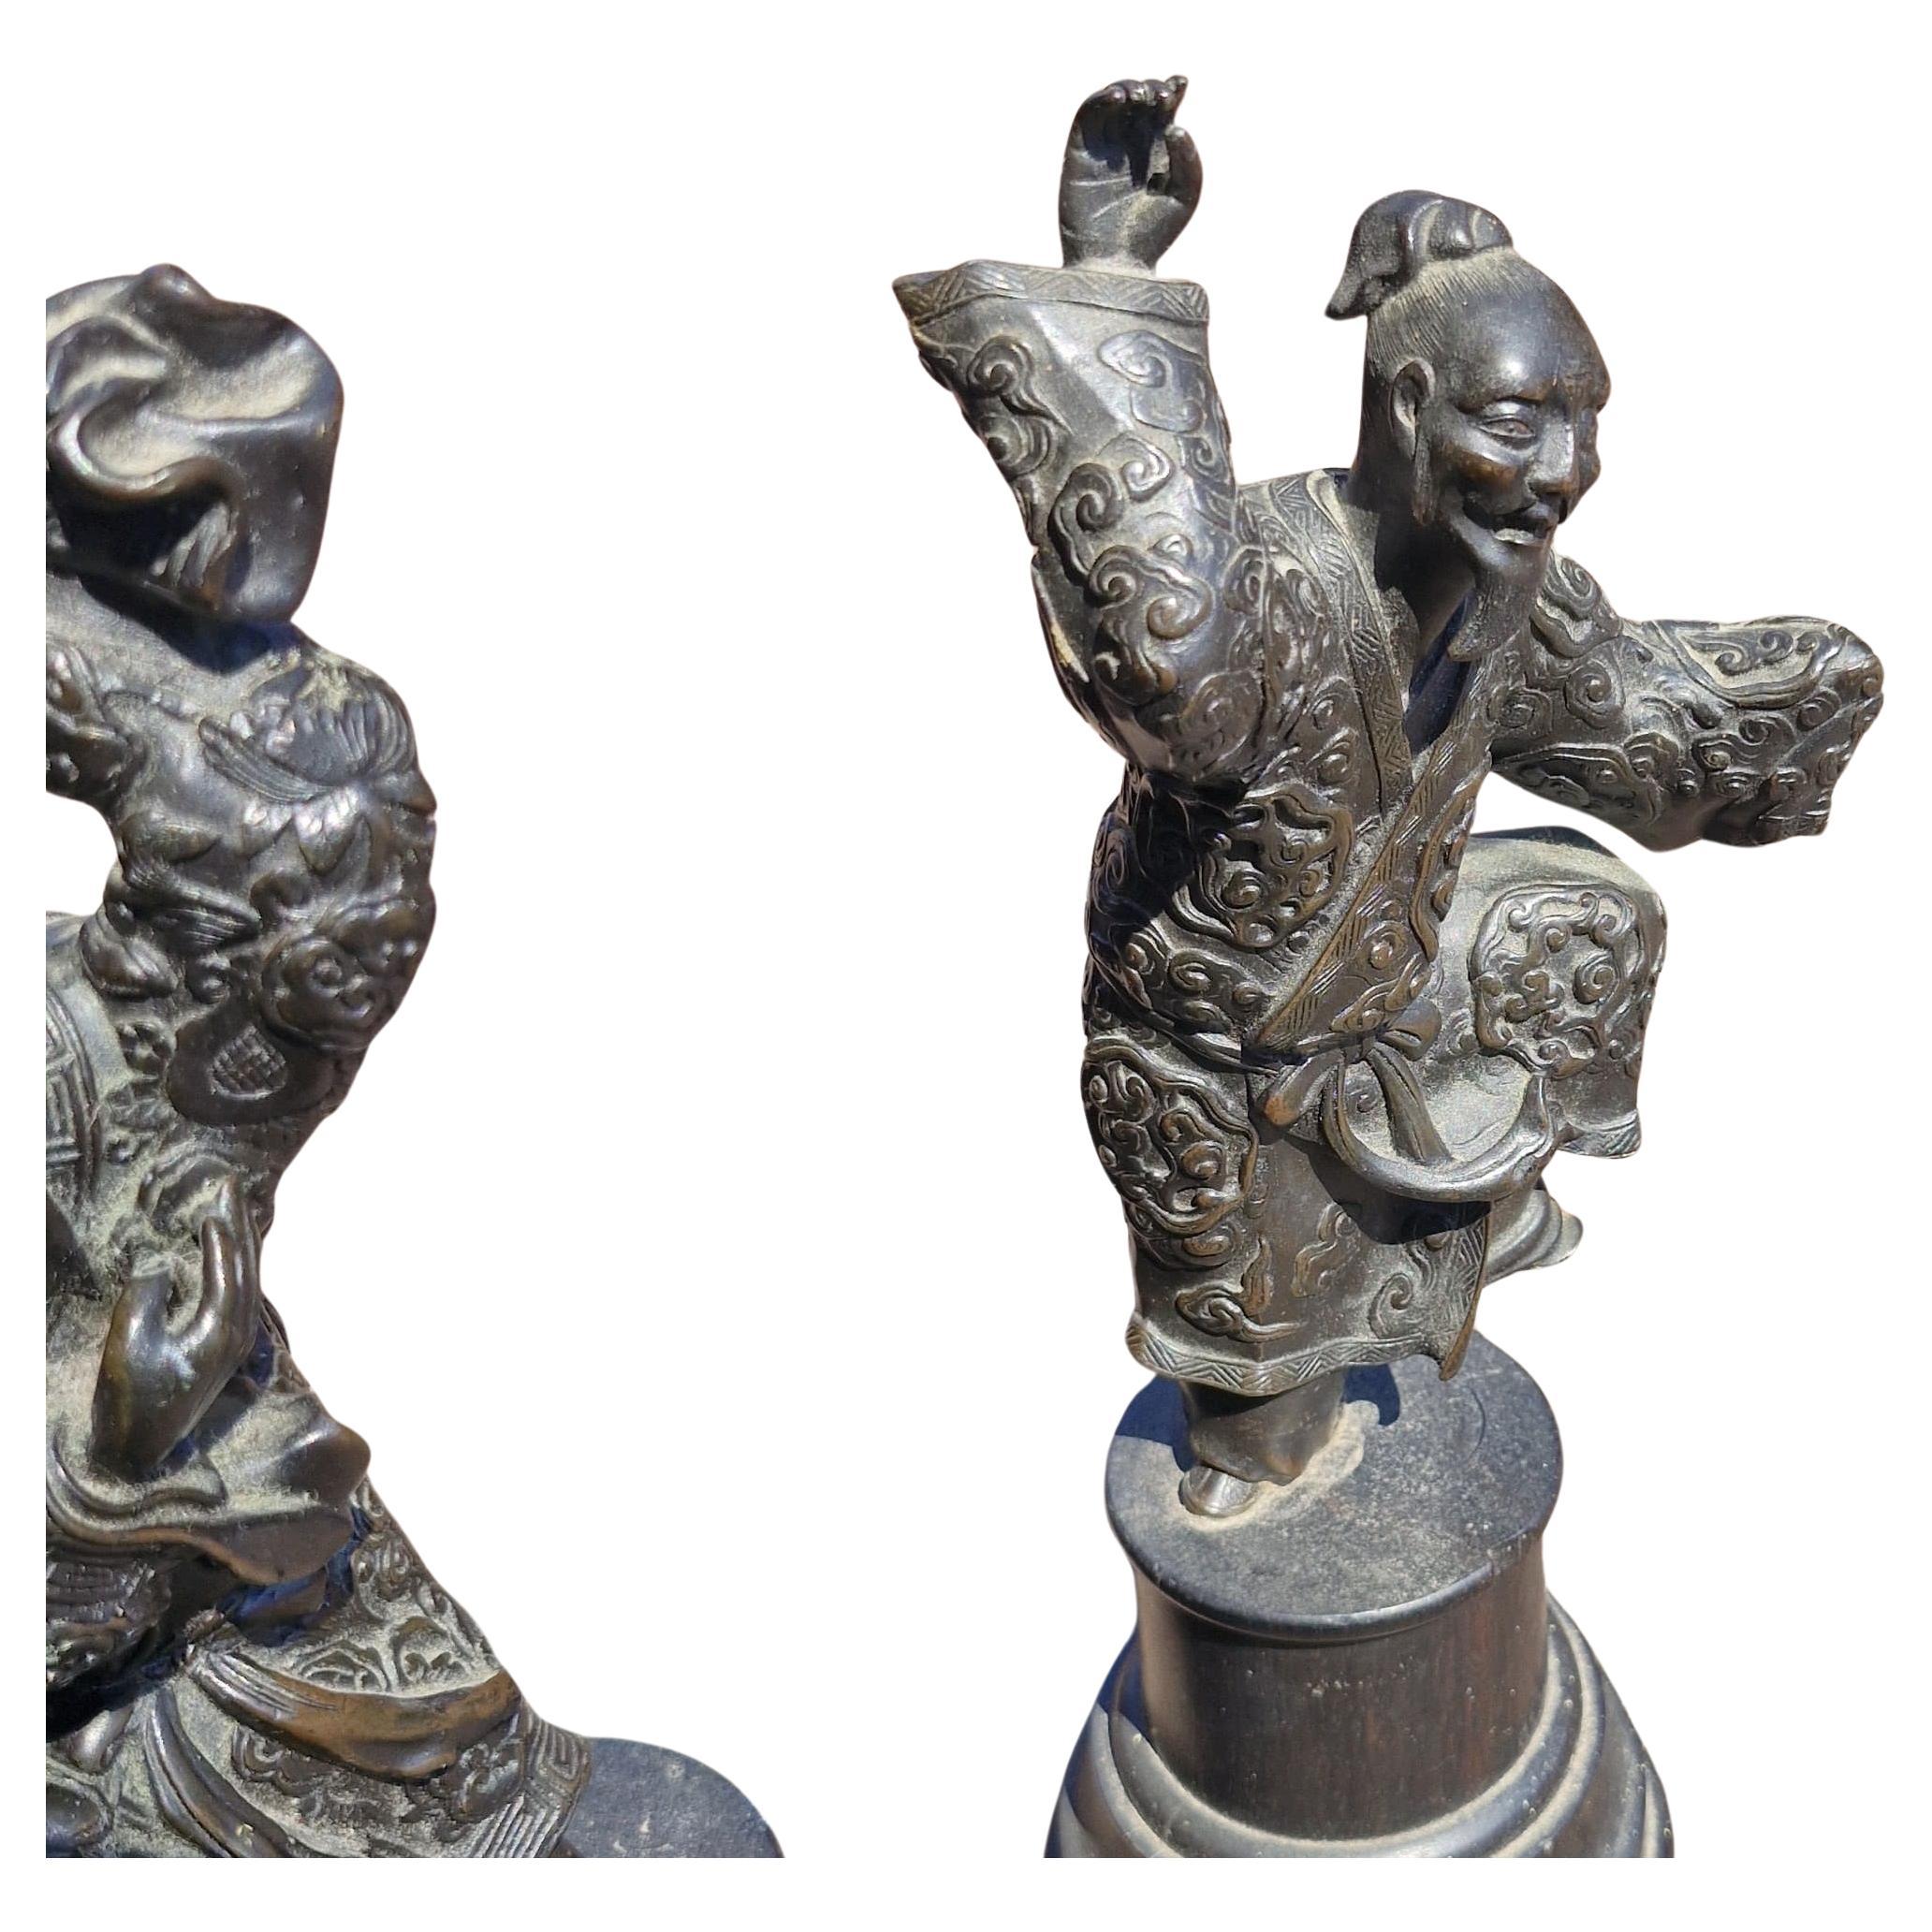 Condition Report: 29cm inc stand. Good condition.

Heavy and top quality Meiji period dancing Figures. Top quality